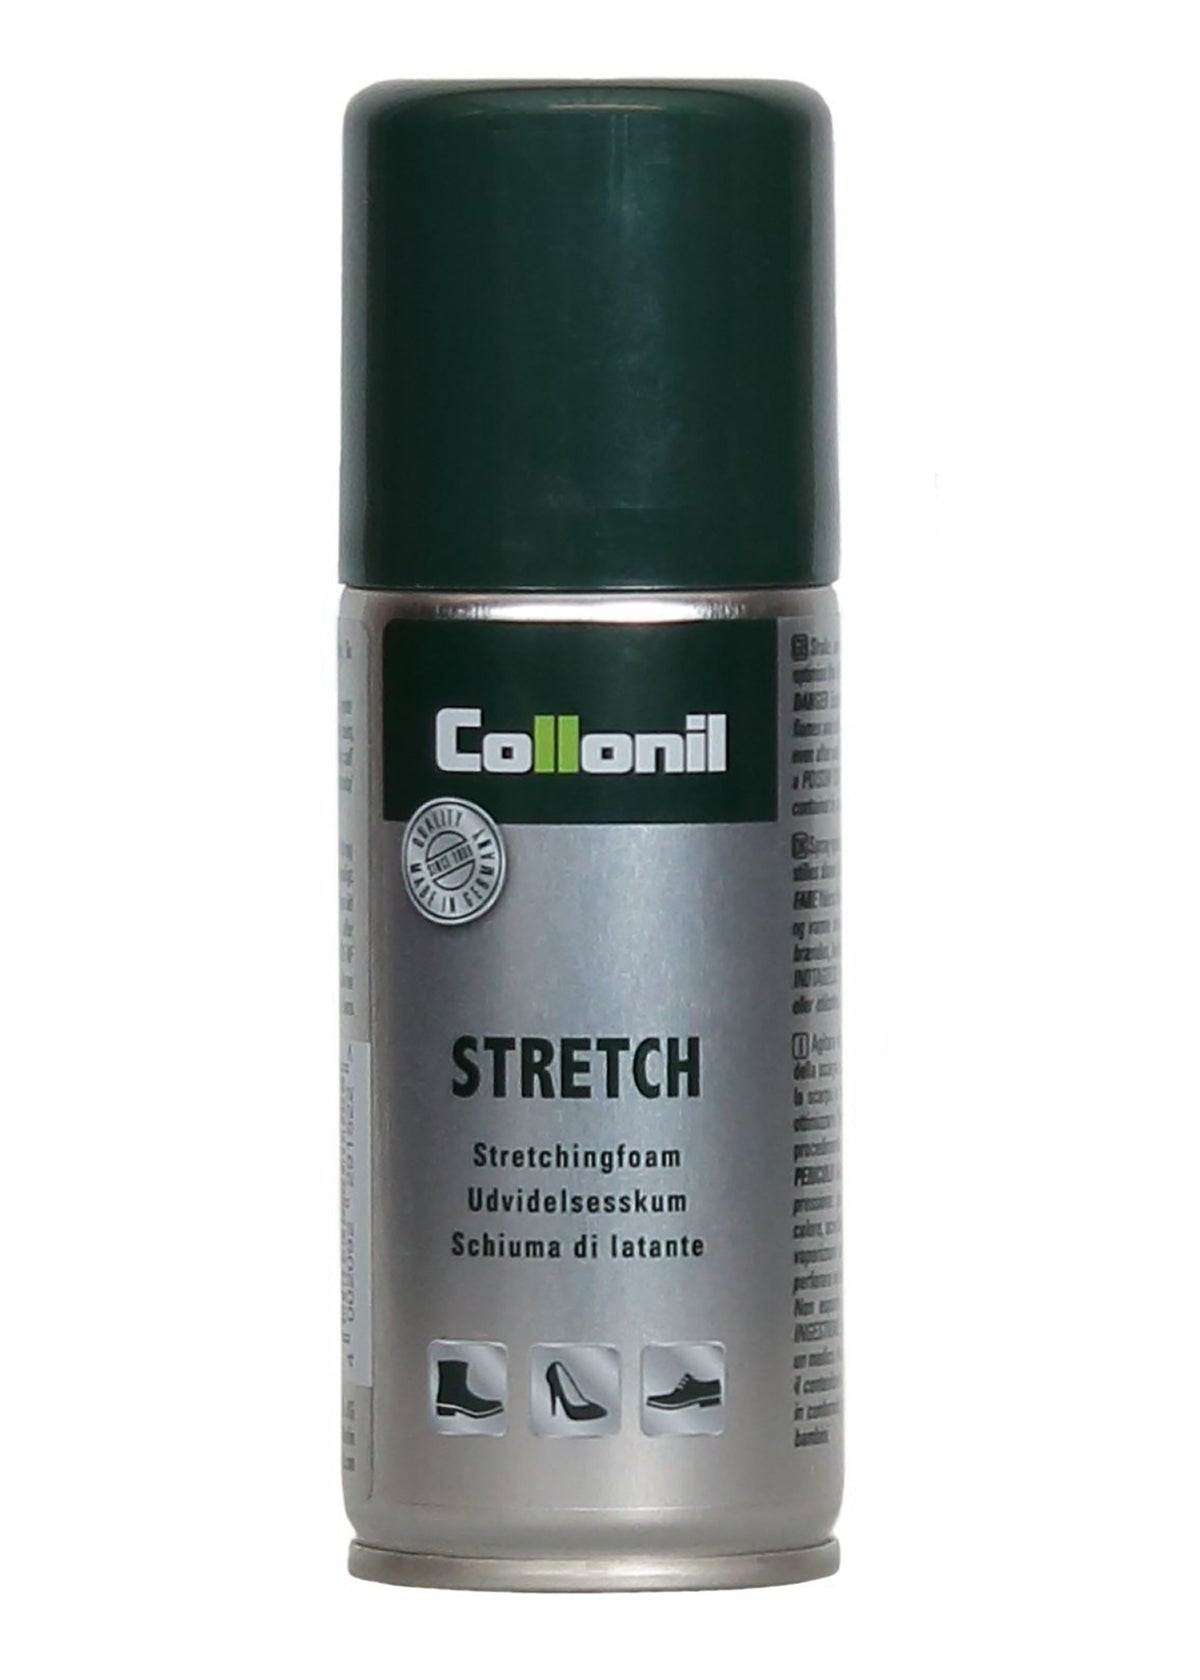 Collonil Stretch - stretching agent, 100 ml